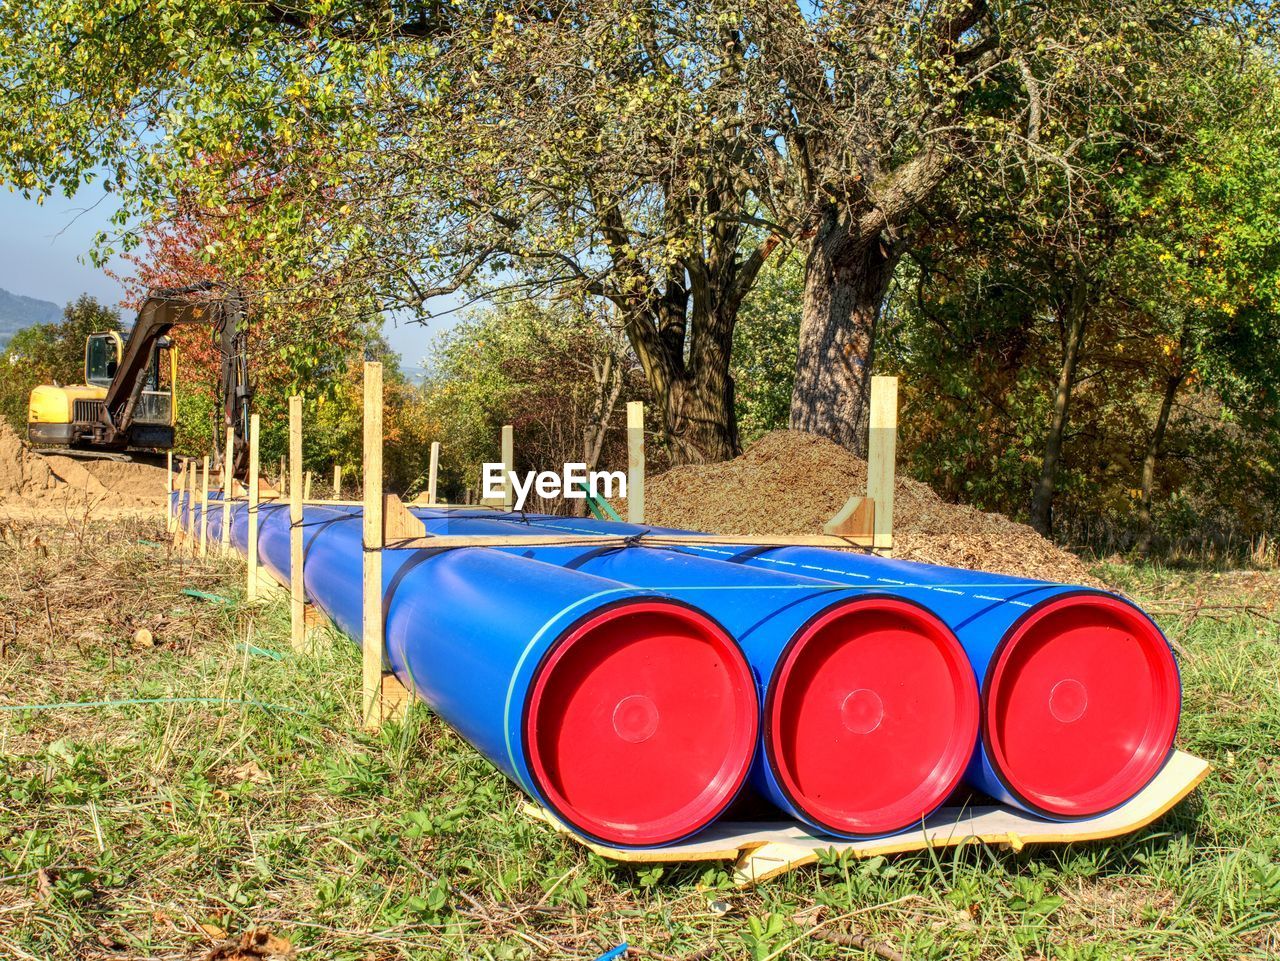 Trench, spare part. service company replace old corroded steel water pipelines by new hdpe tubes.